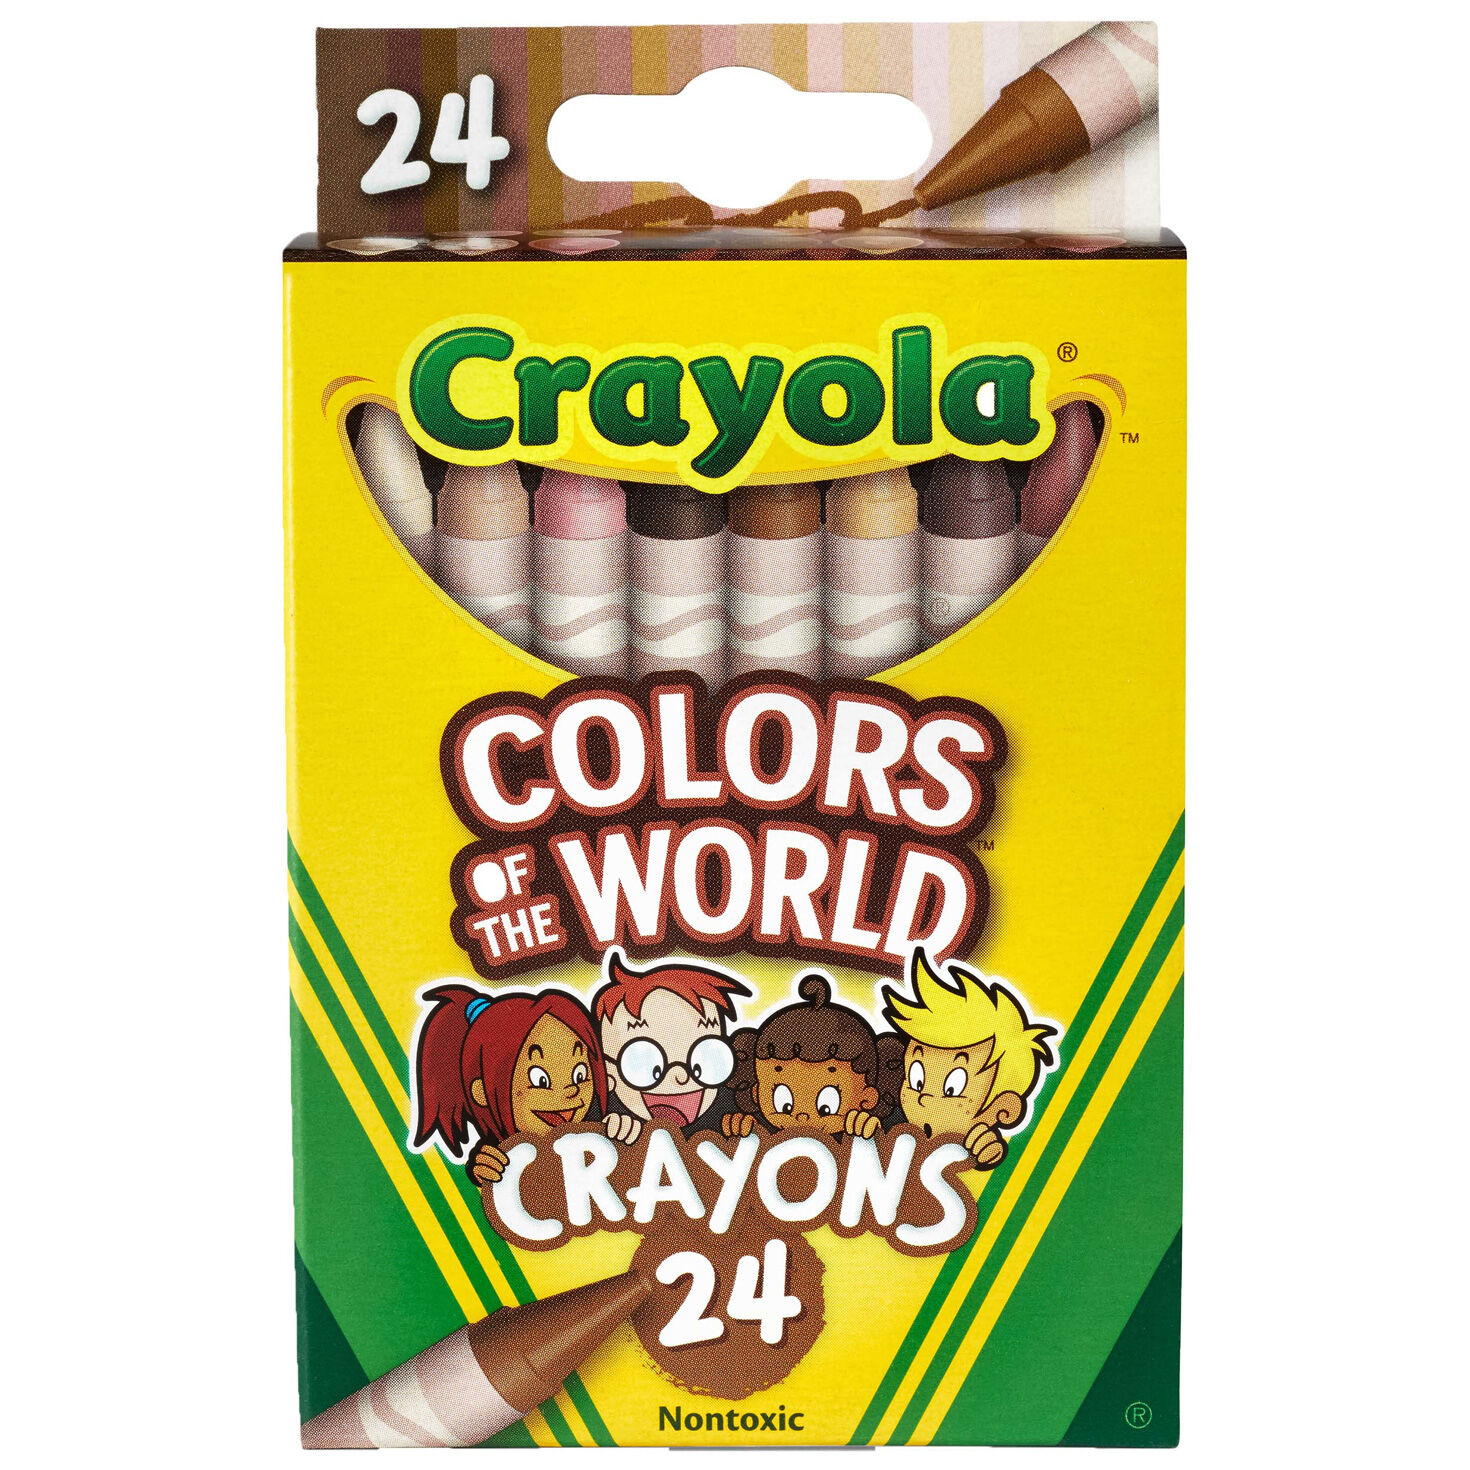 CRAYONS 24 Count